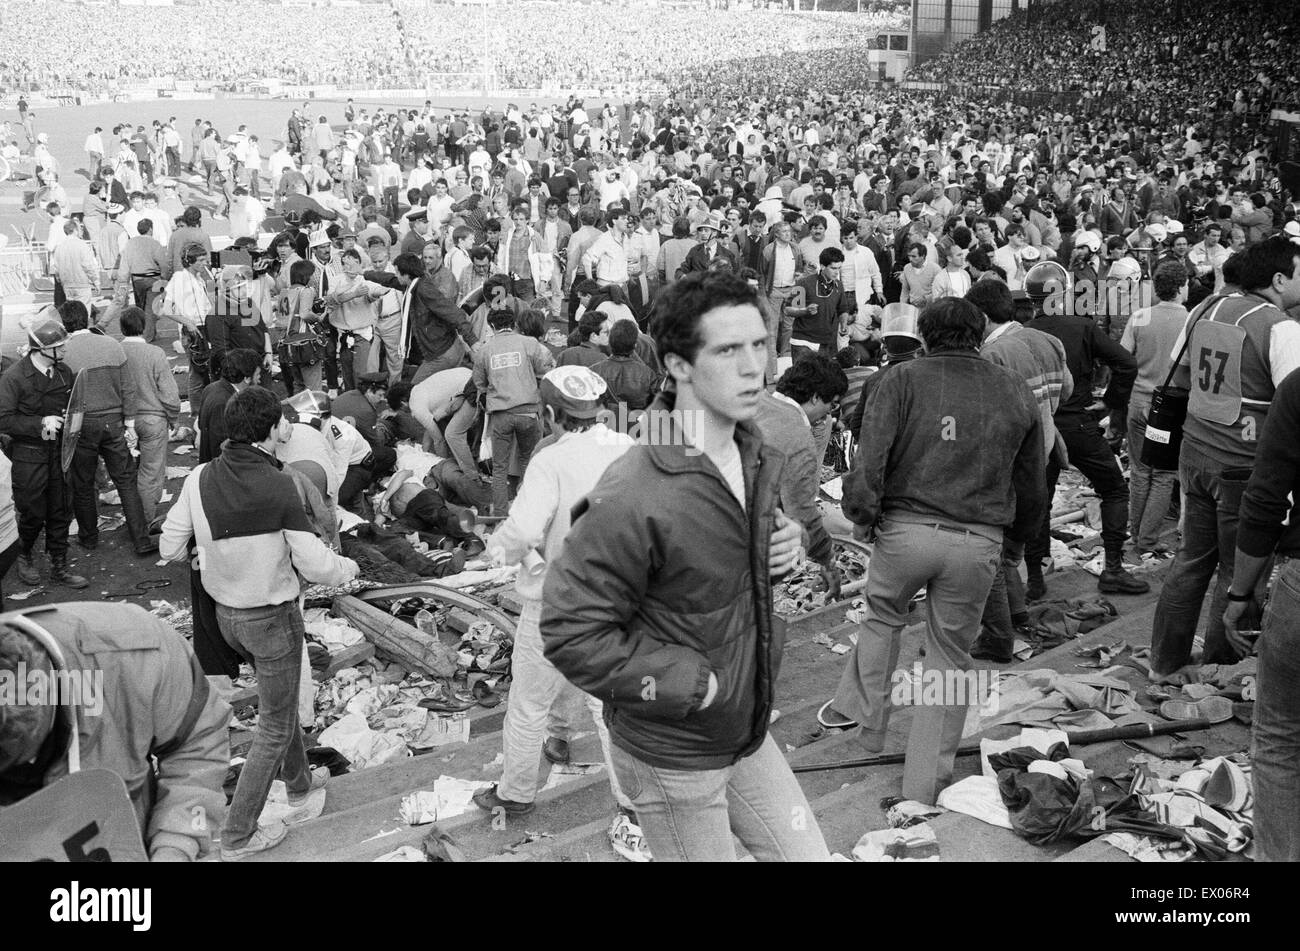 WARNING : GRAPHIC CONTENT Juventus v Liverpool, 1985 European Cup Final,  Heysel Stadium, Brussels, Wednesday 29th May 1985. Heysel Stadium Disaster.  39 people, mostly Juventus fans, died when escaping missiles being thrown